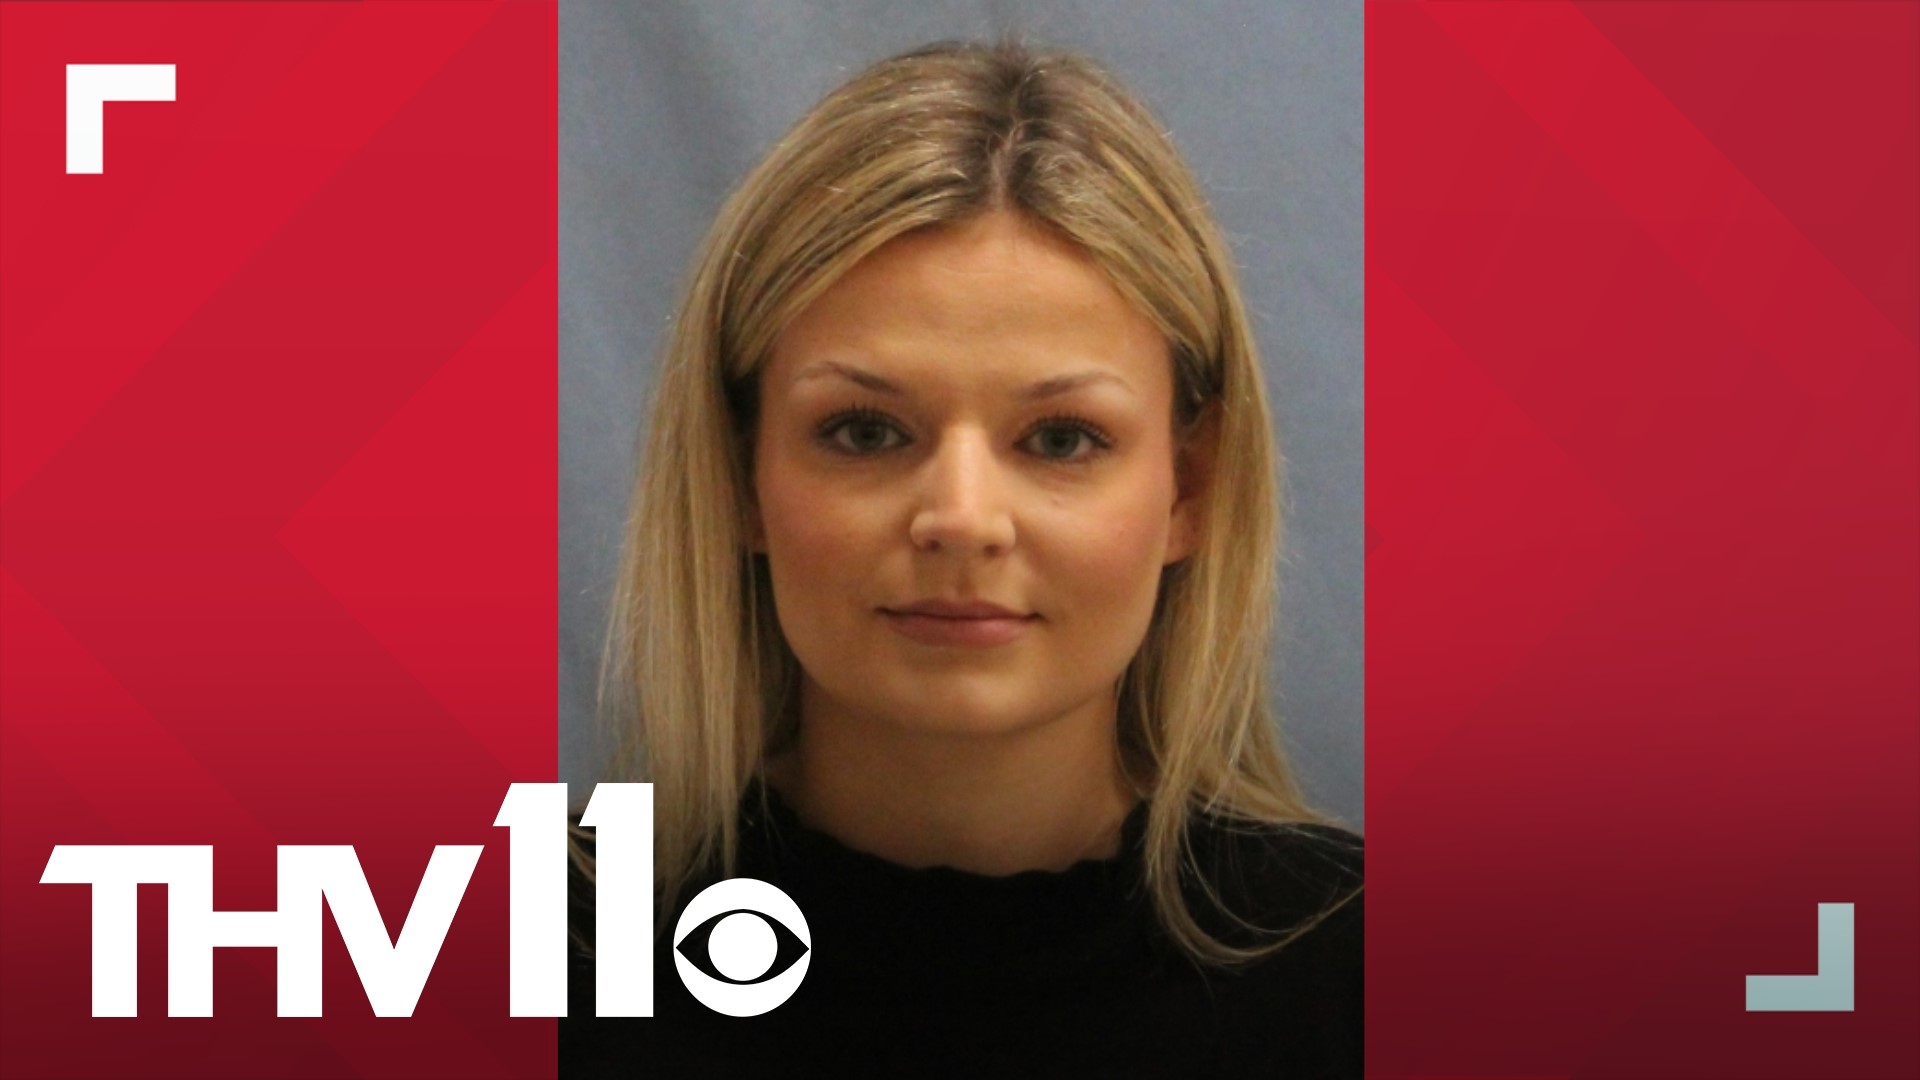 A 26-year-old Arkansas teacher has been arrested after she had an alleged sexual relationship with a minor while working as a volunteer at a Little Rock church.